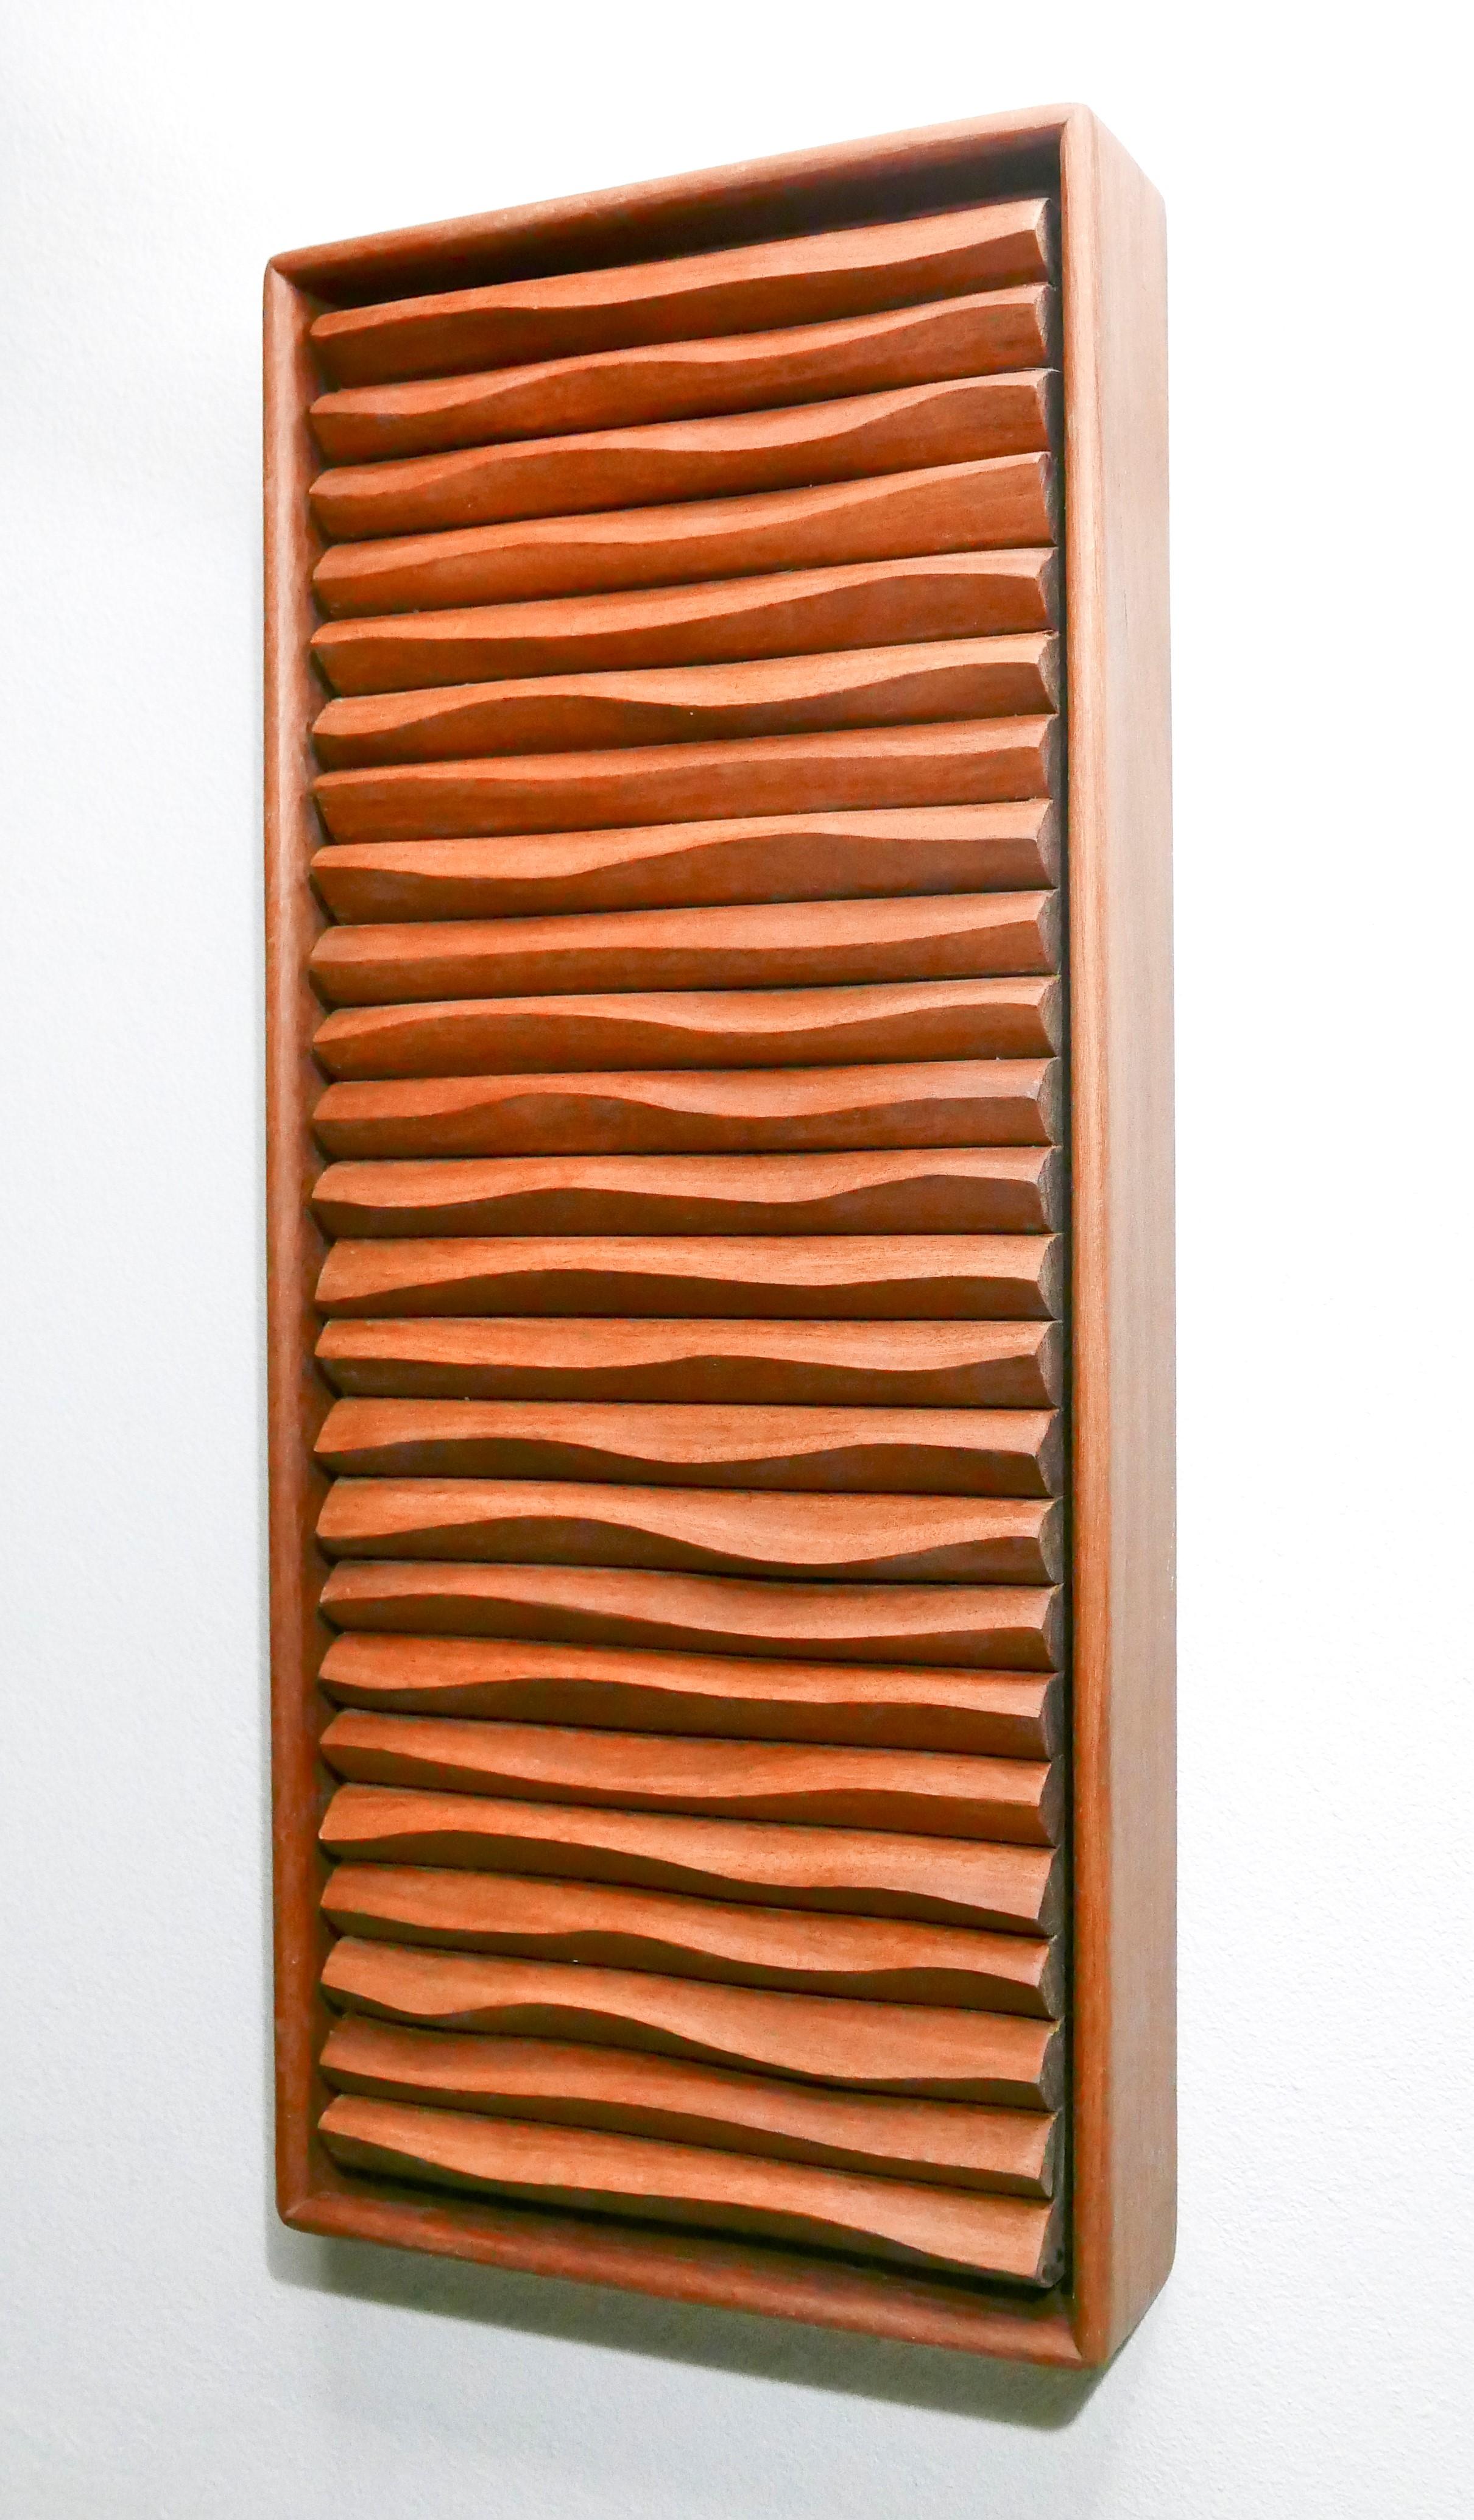 Modern Contemporary Wall Mounted Sculpture from 'Ripples' Series by James Rowland